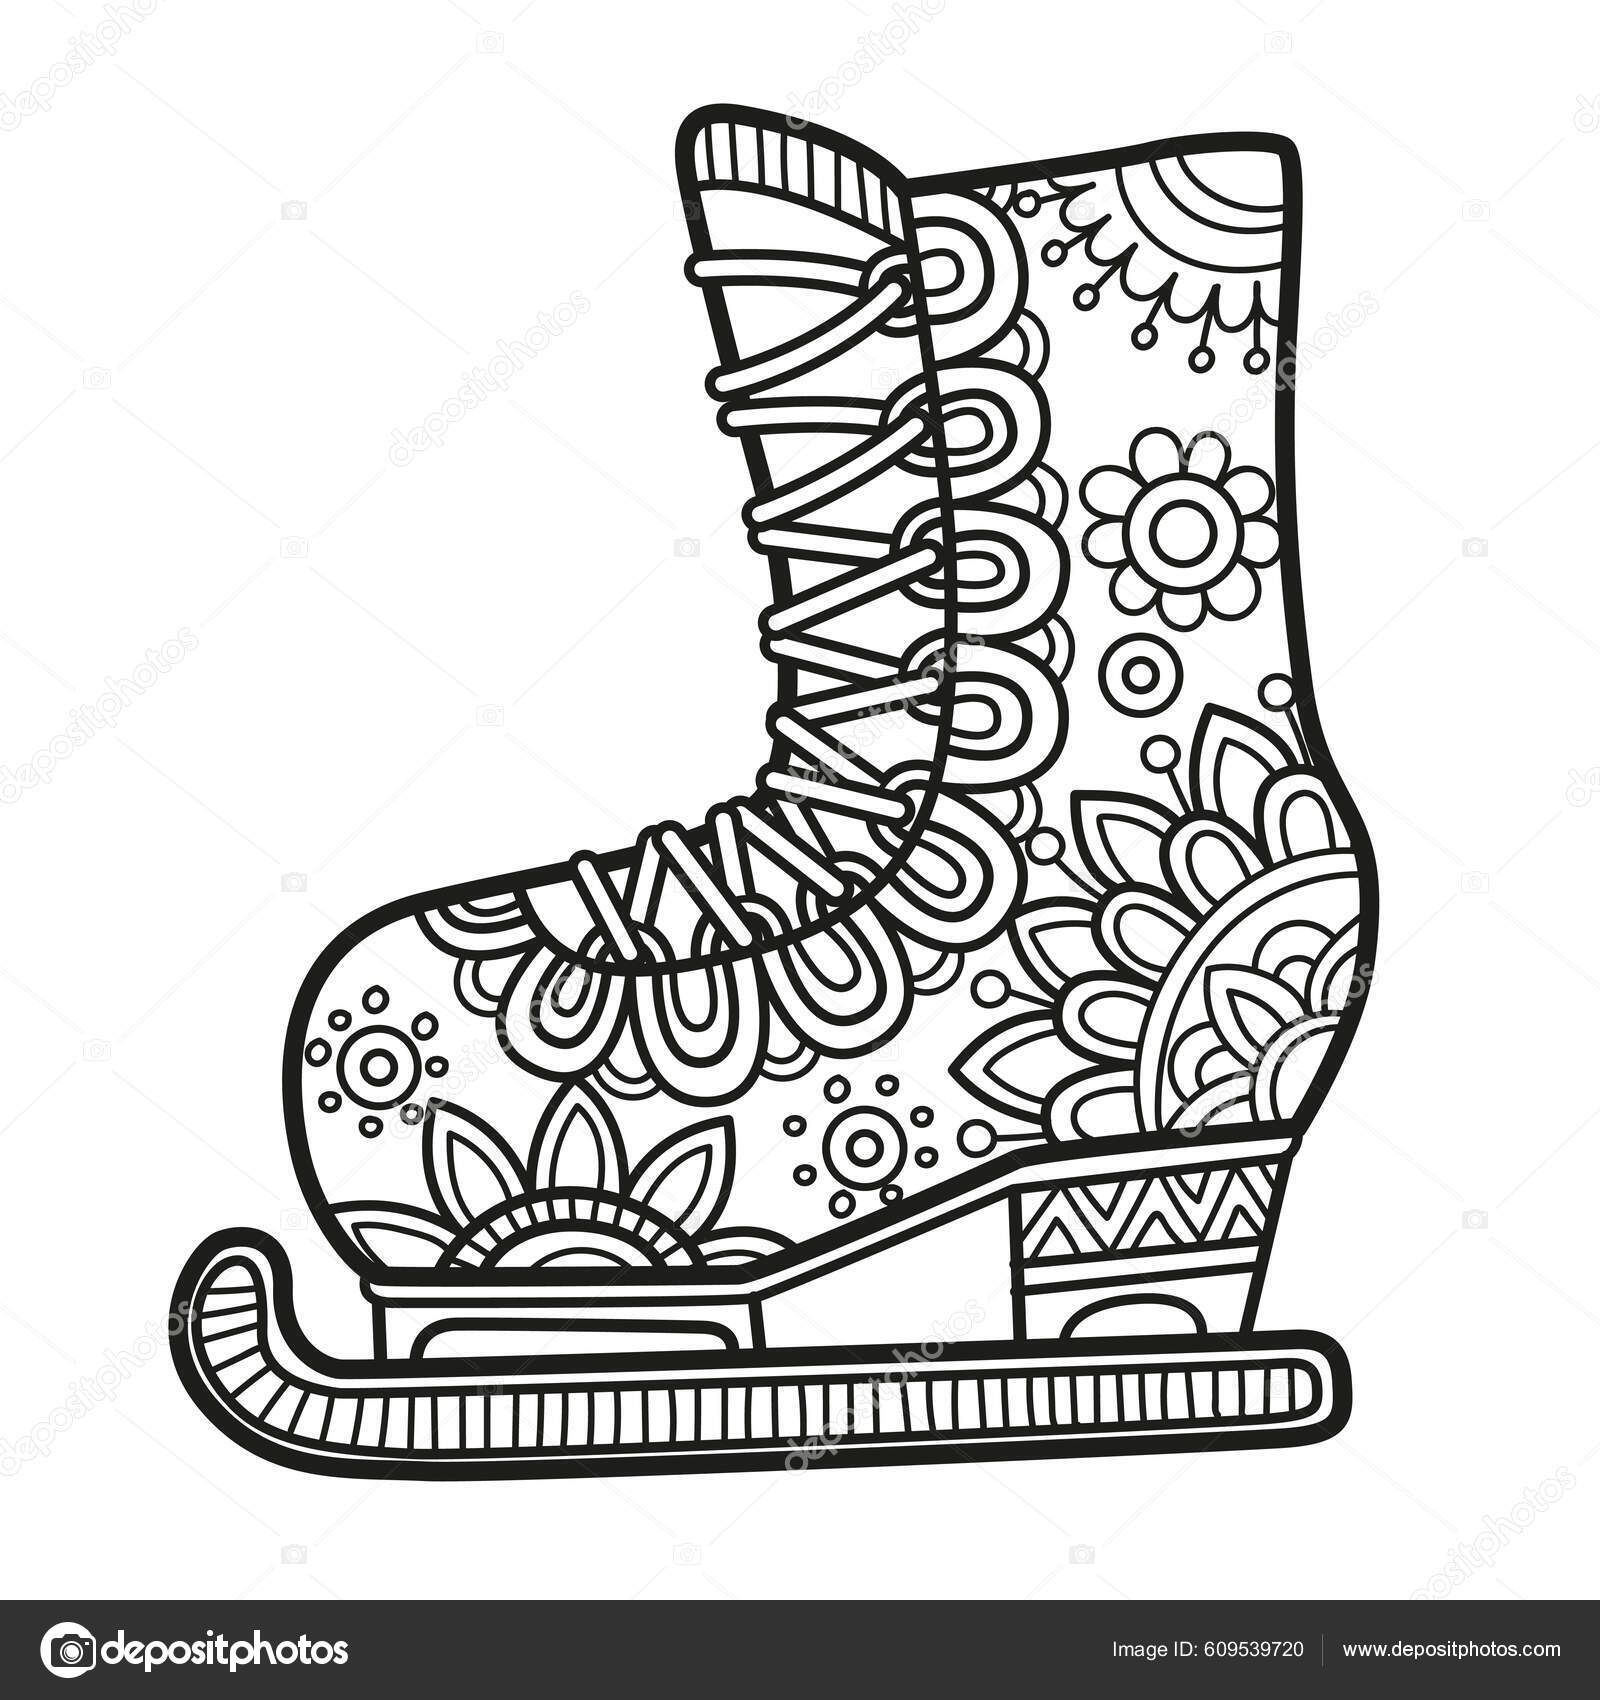 Winter Boy Skates Winter Snowflakes Adult Coloring Book Page Hand